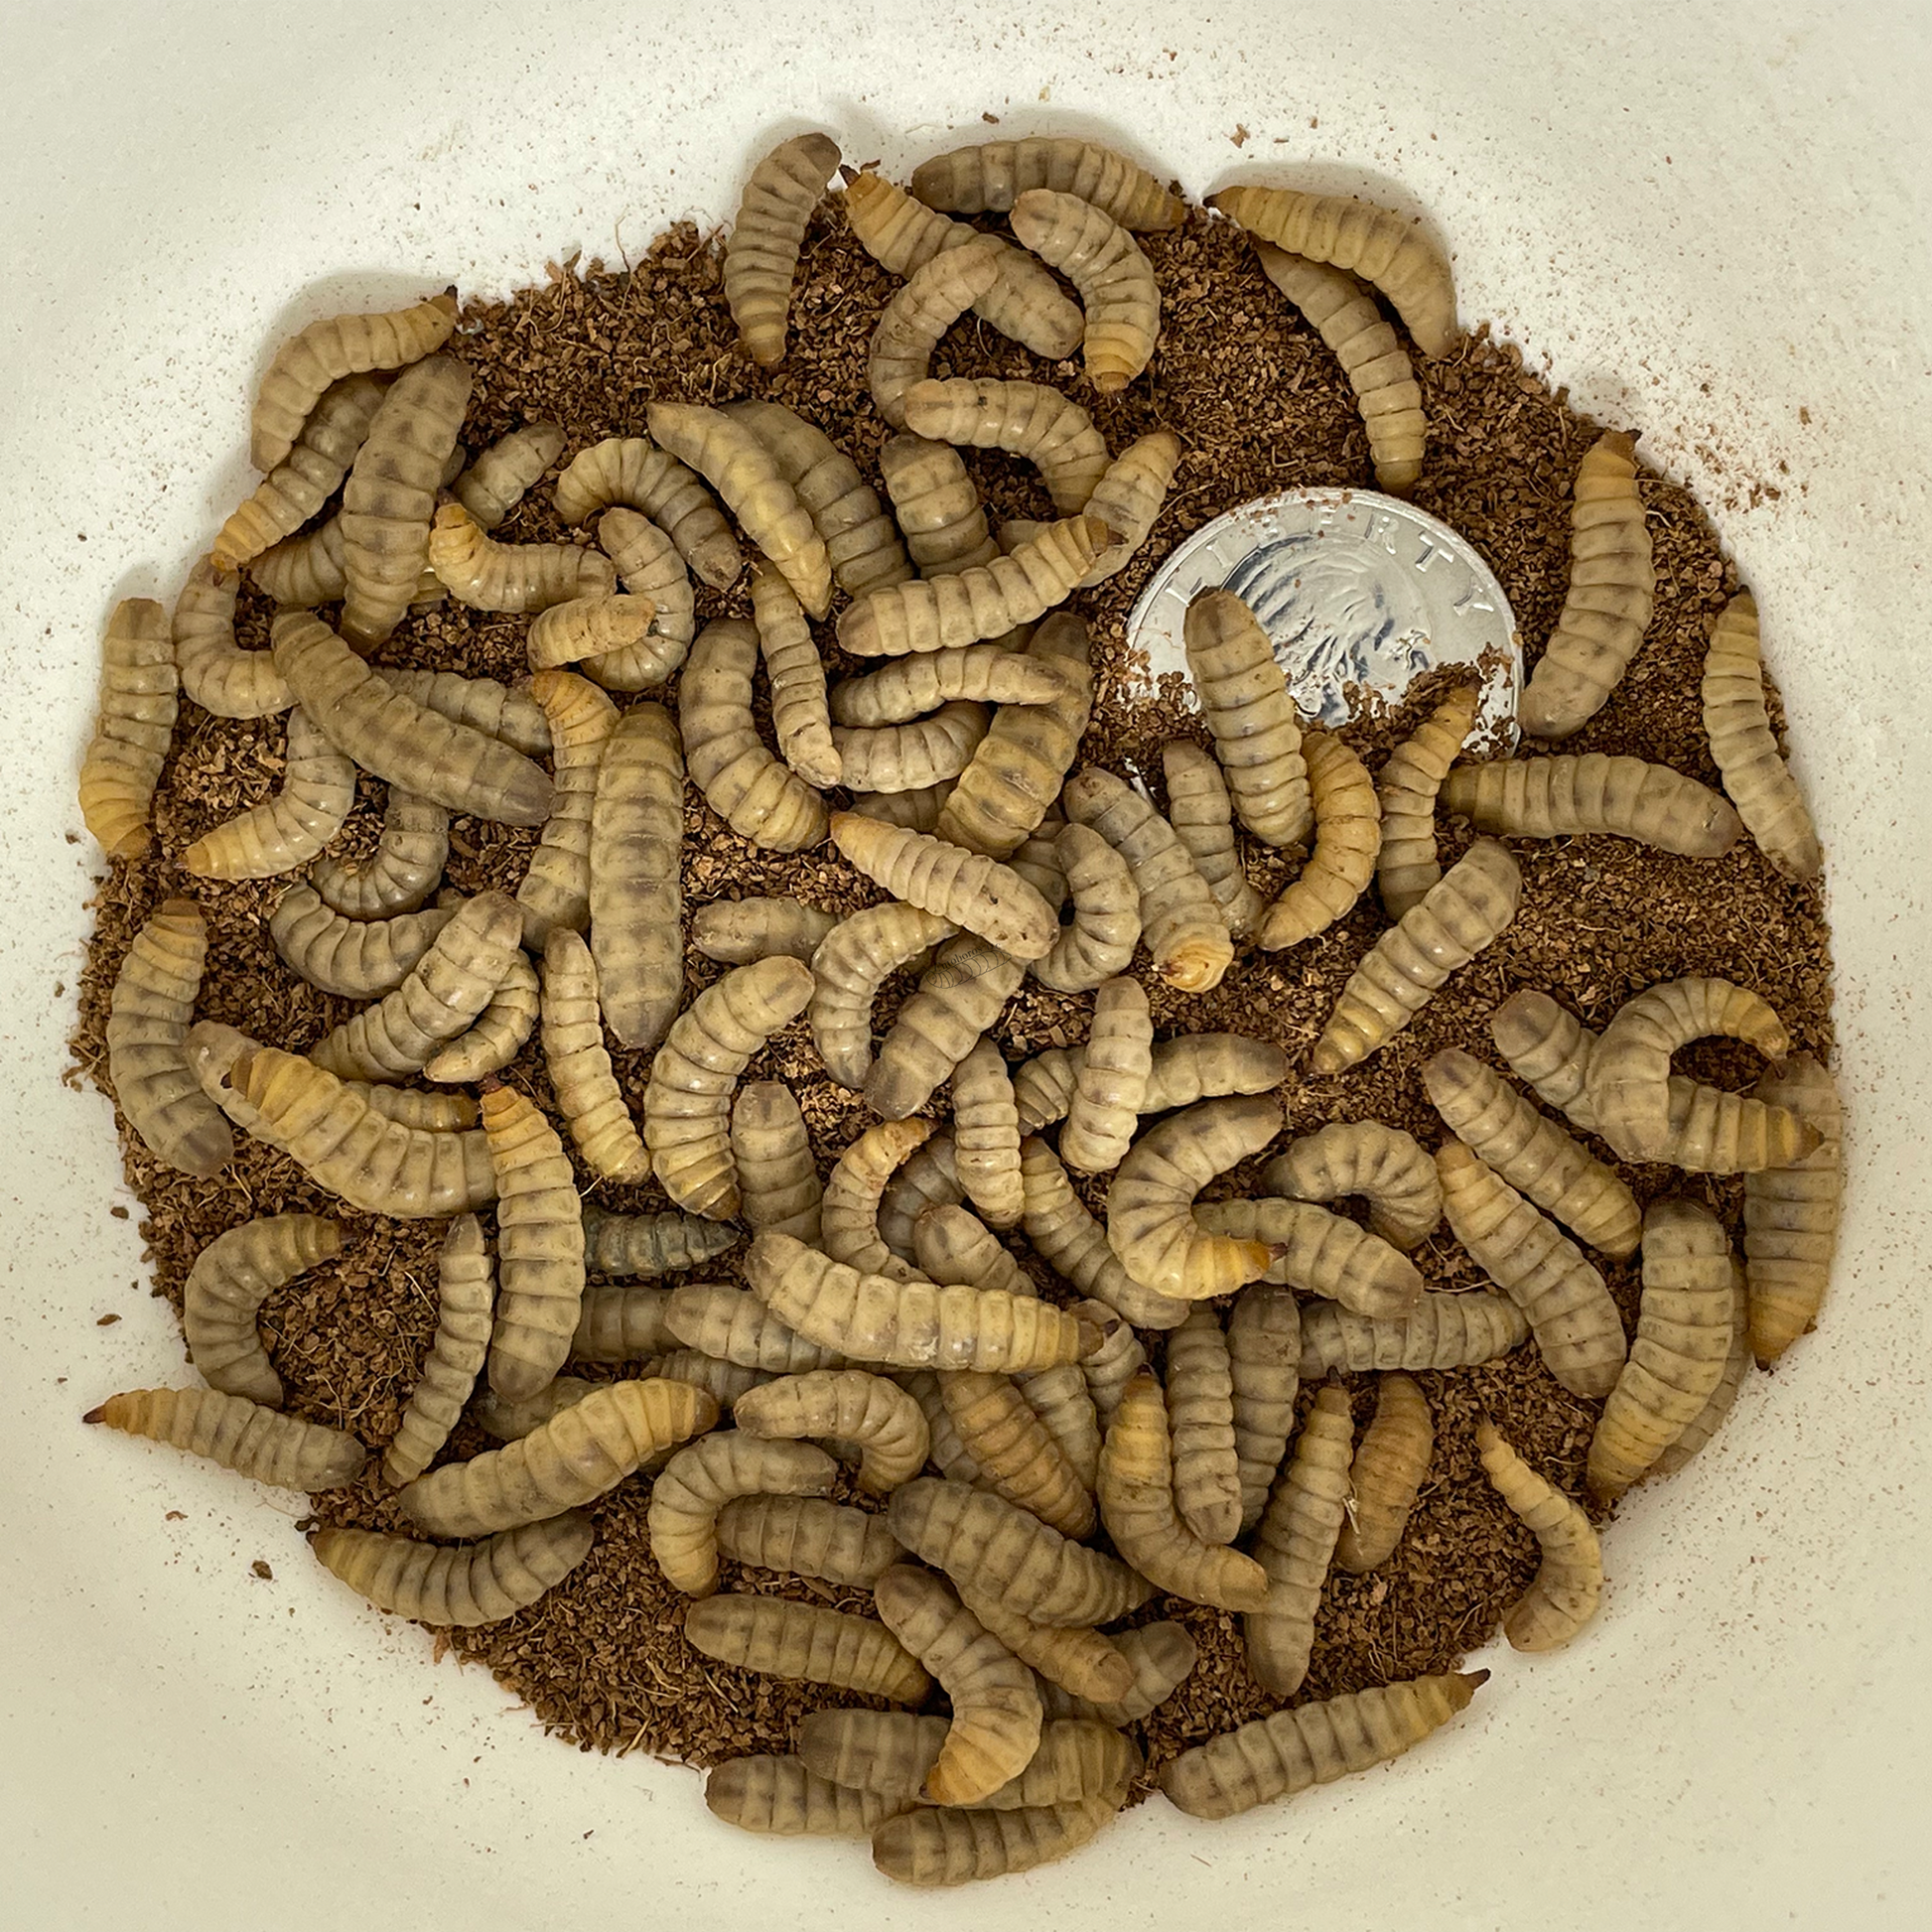 Container with Large Black Soldier Fly larvae in a substrate with a quarter for scale.